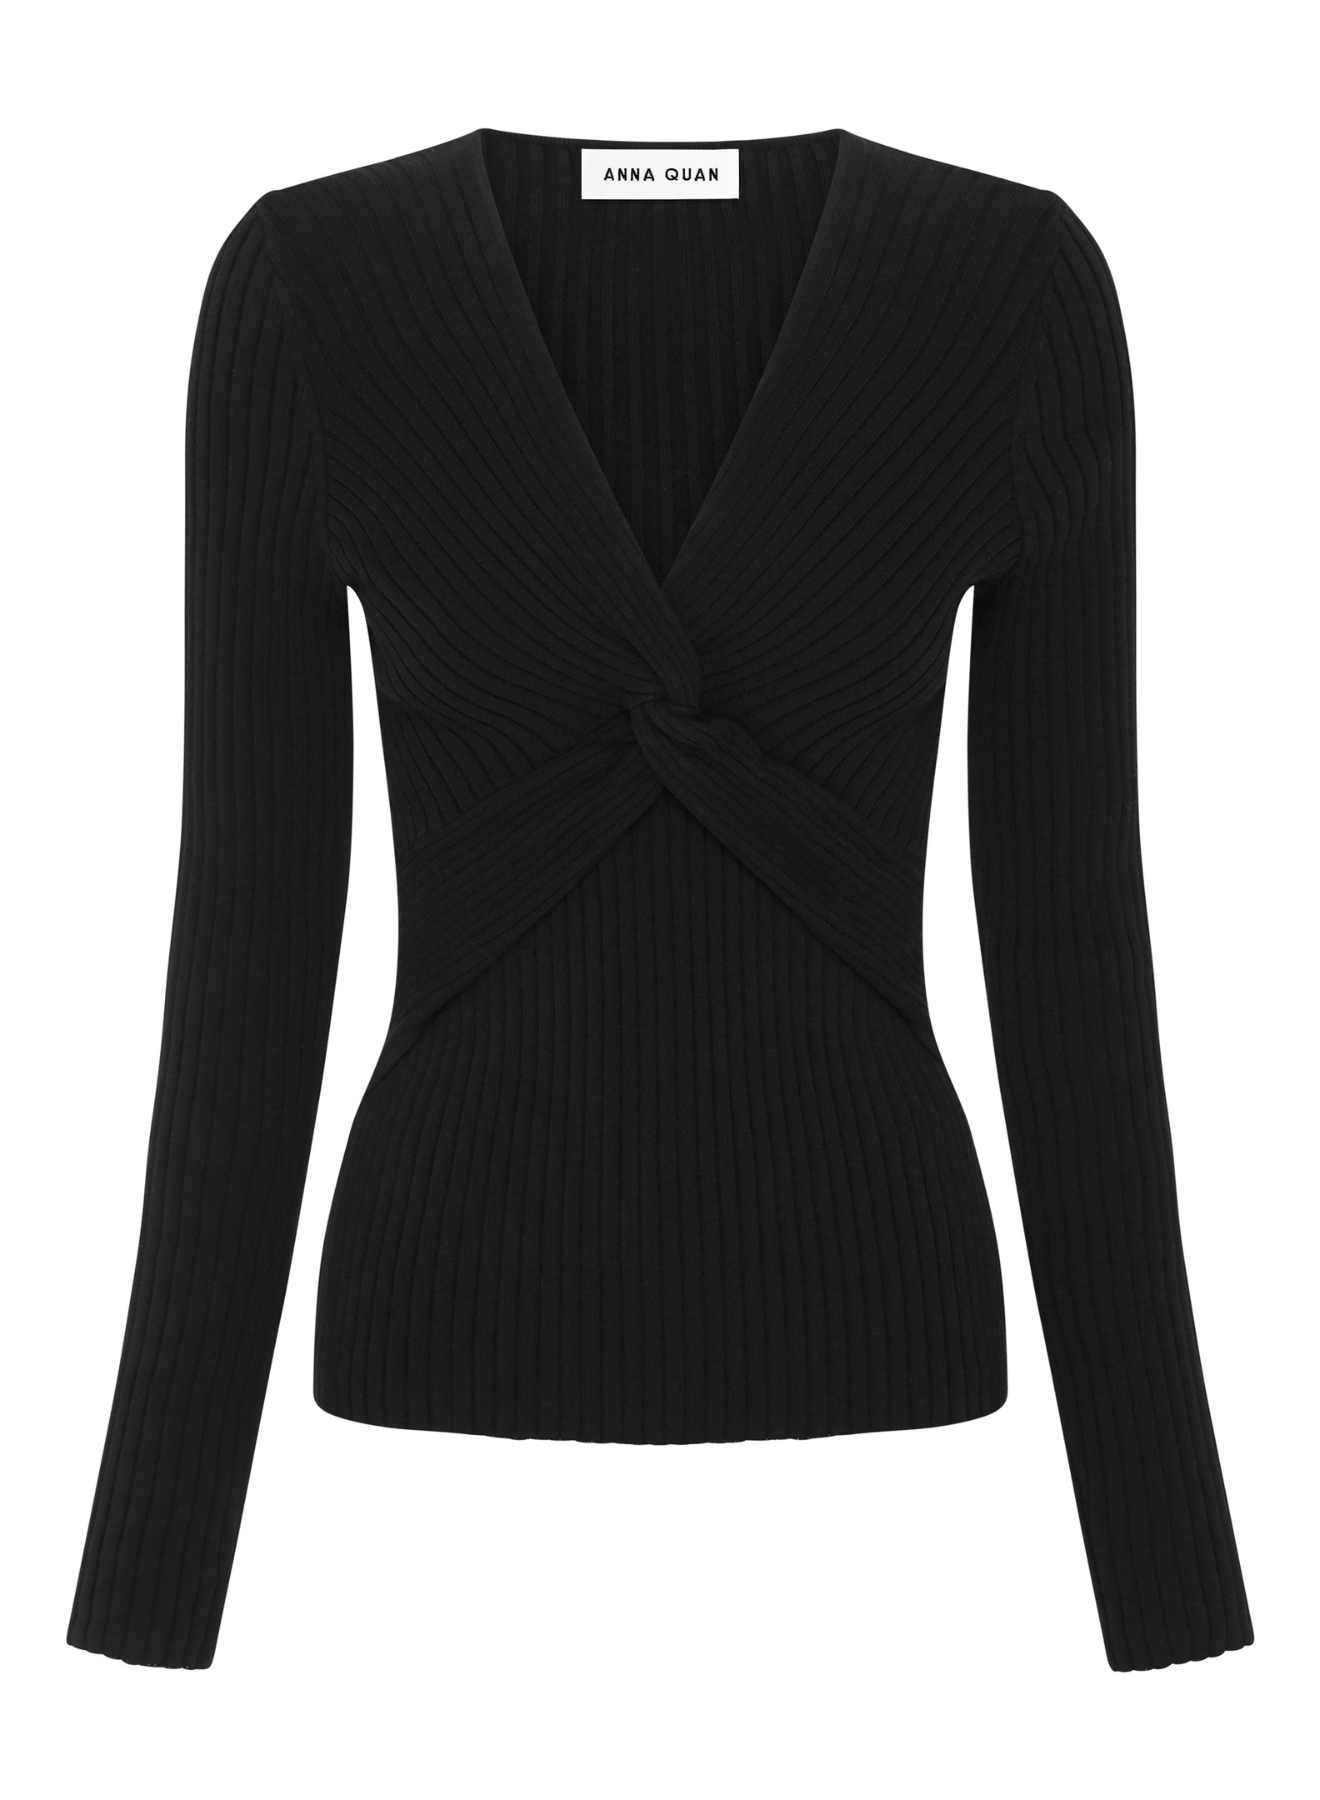 Upgrade your wardrobe with the ANNA QUAN Long Sleeve Knit Top featuring an interest point centre front twist. This versatile piece seamlessly combines comfort and style; ideal for various occasions, it's our new season must-have long sleeve knit top. Must-have knitwear, knit tops for work, tops for work, work tops, warm work tops.